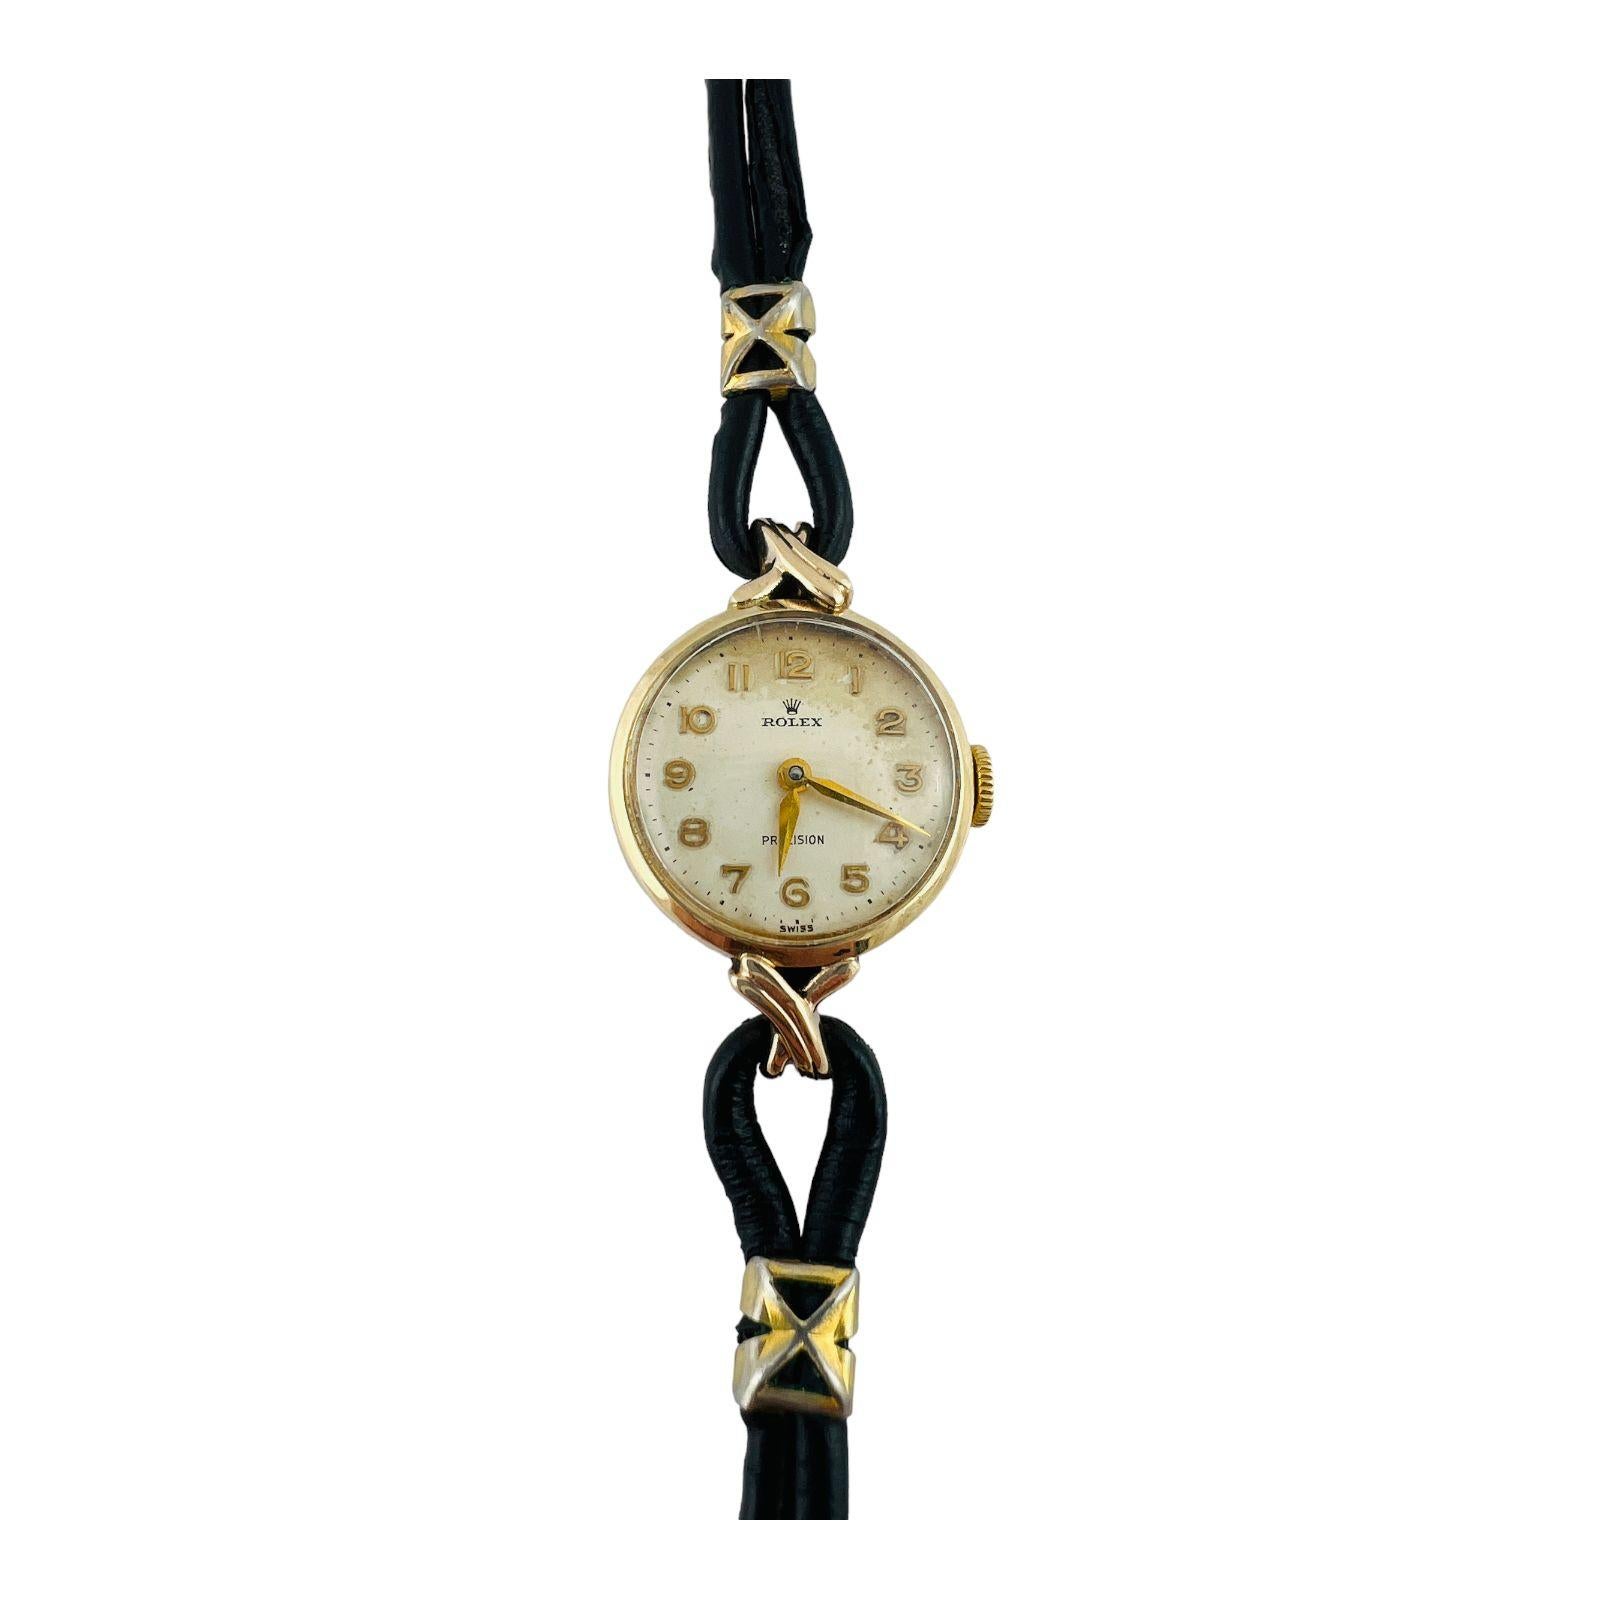 Rolex Ladies 9K Yellow Gold Precision Ladies Watch

This vintage ladies Rolex watch is set in 9K solid yellow gold

This precision model watch is from the late 1940's - 1950's

White dial with gold tone markers

Hand winding movement - 17